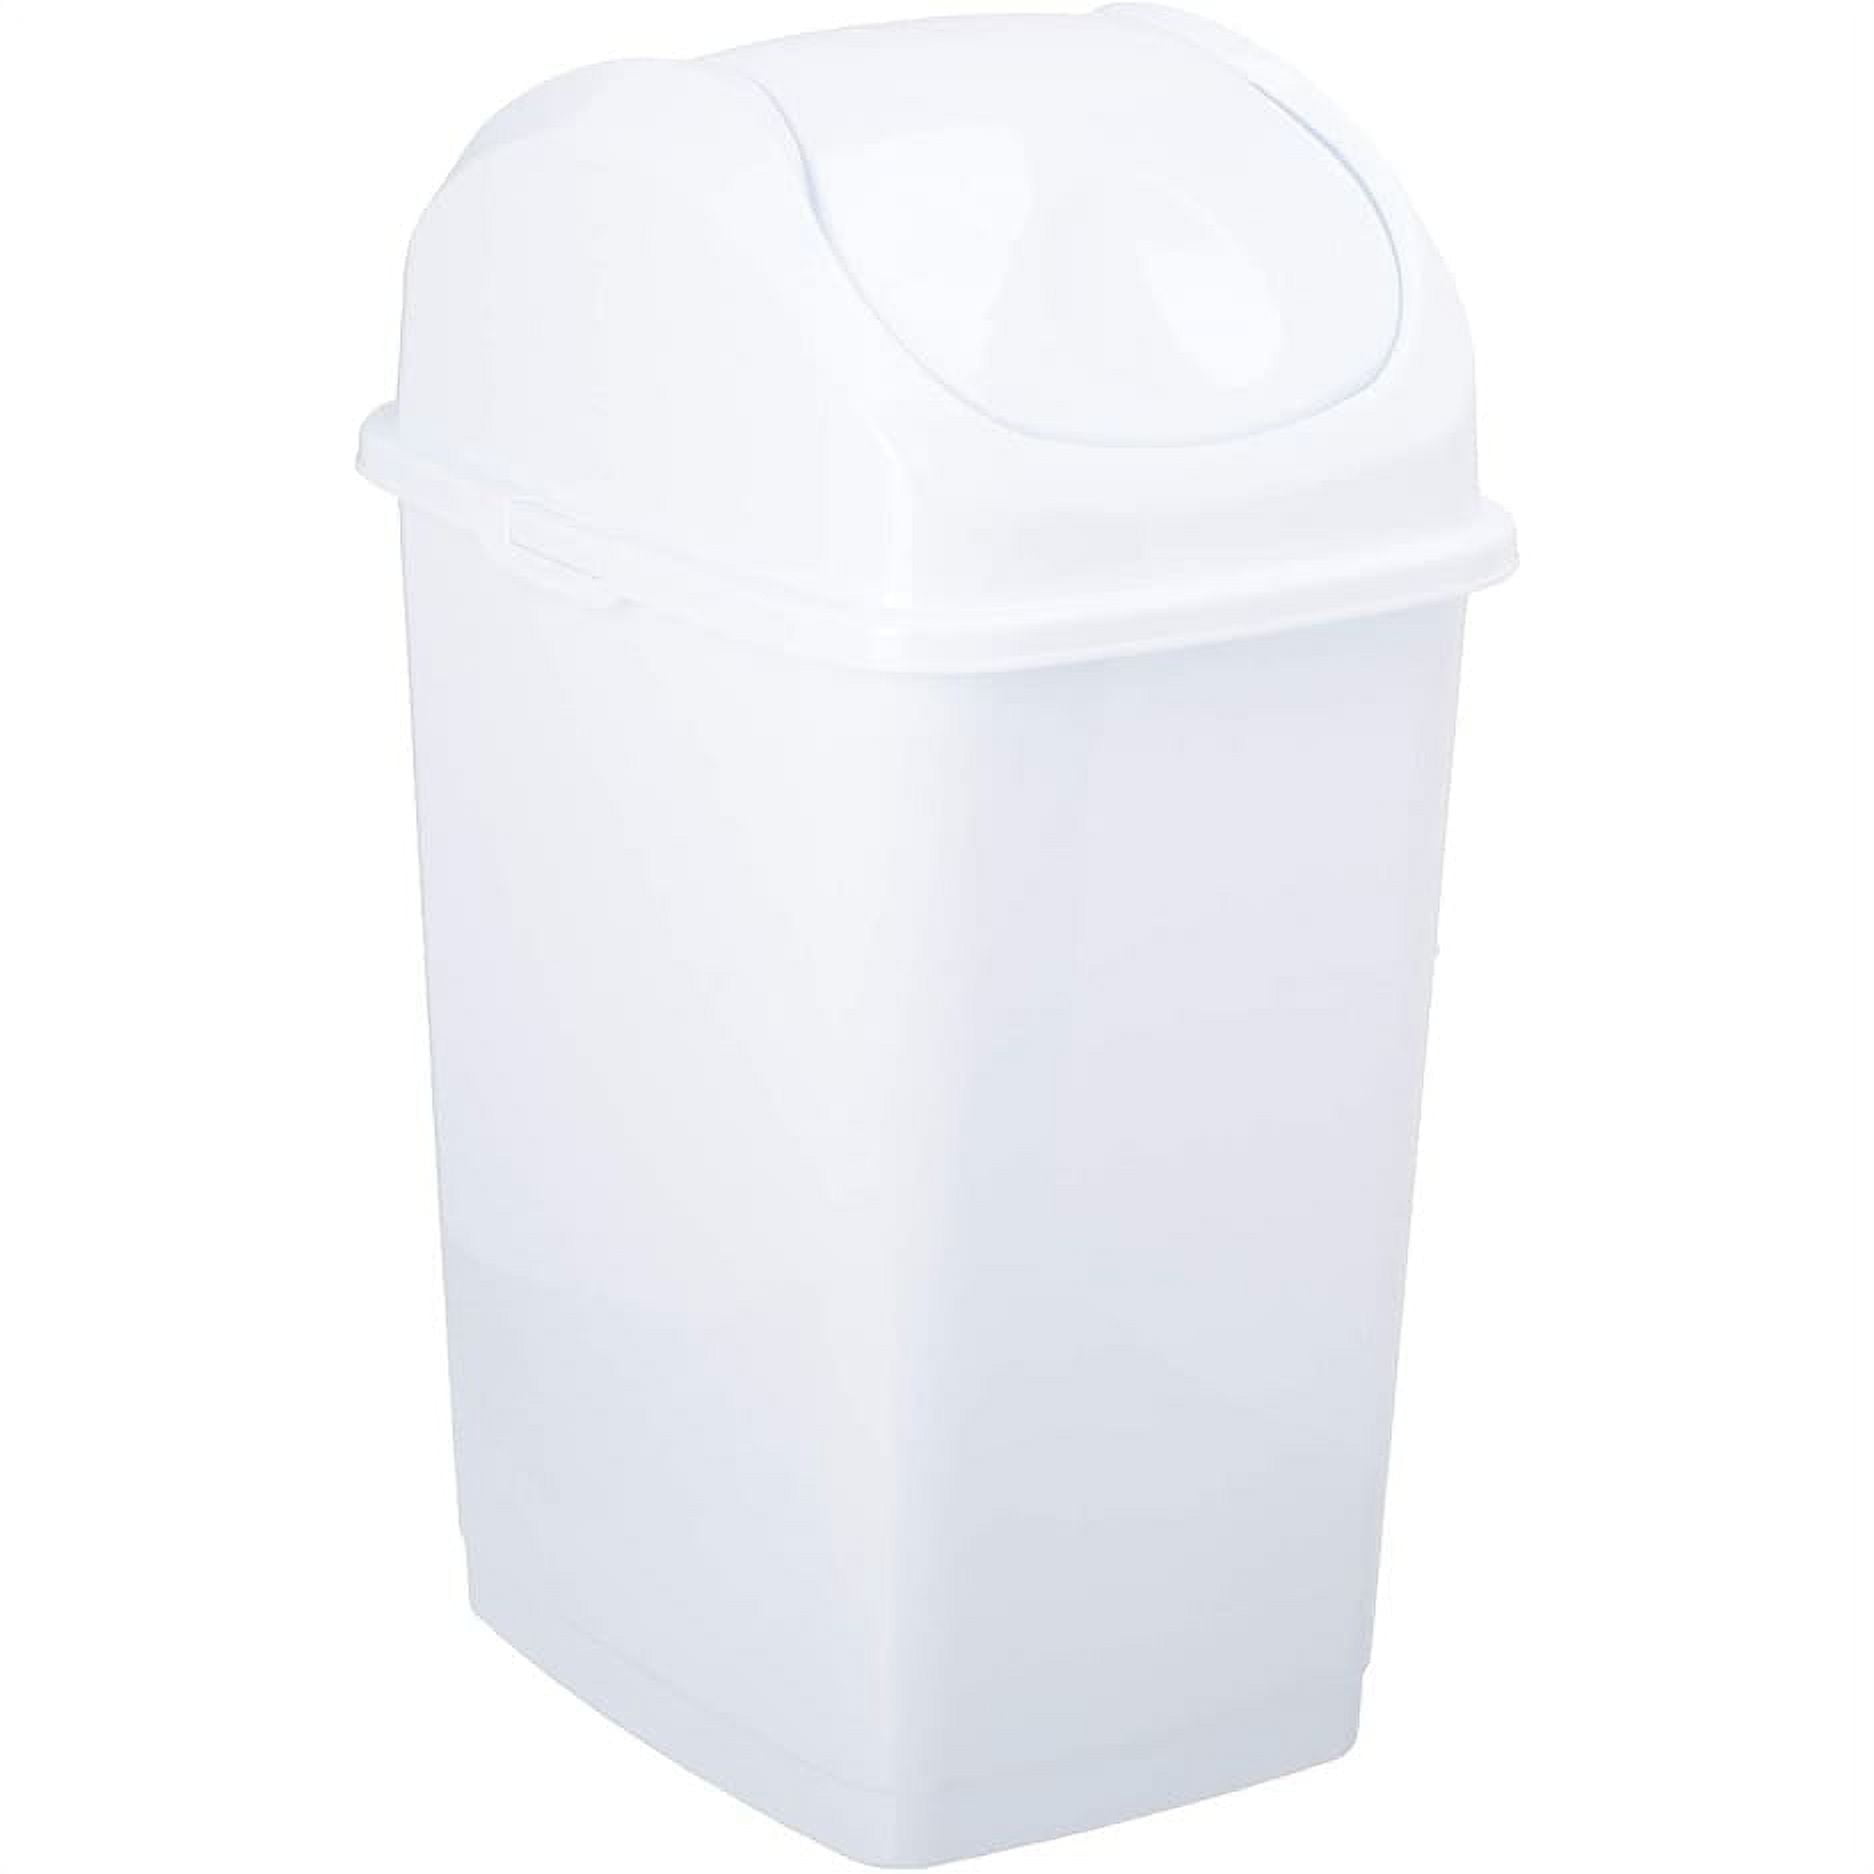 Swing-Top 16.5-Gal. Kitchen Trash Large, Garbage Can for Indoor Or Outdoor  Use TG02254P - The Home Depot